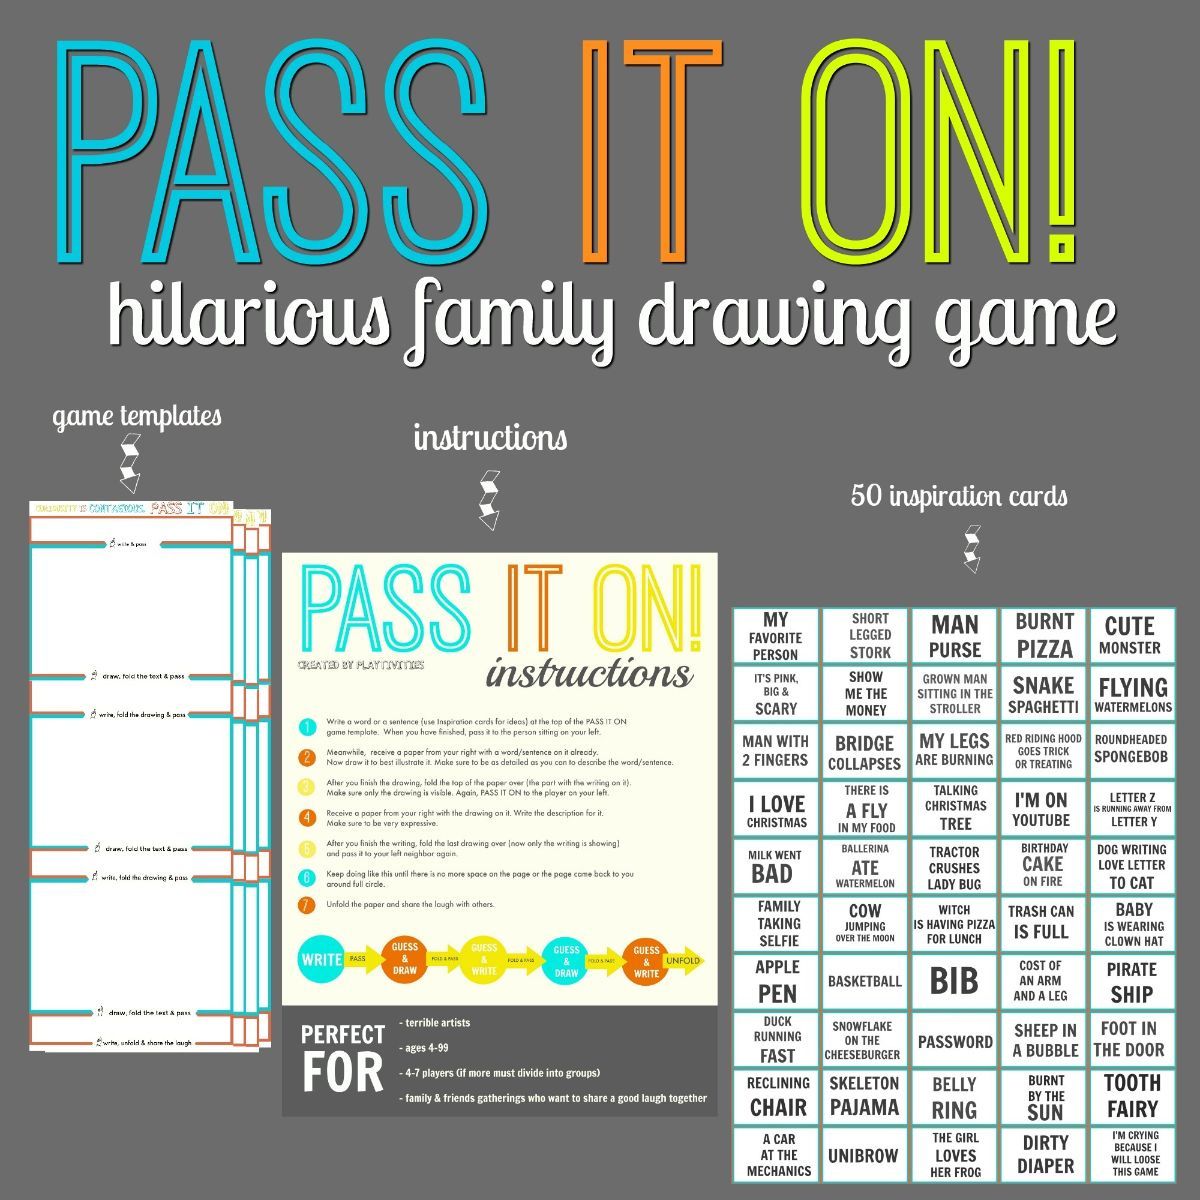 Pass it on drawing game poster.